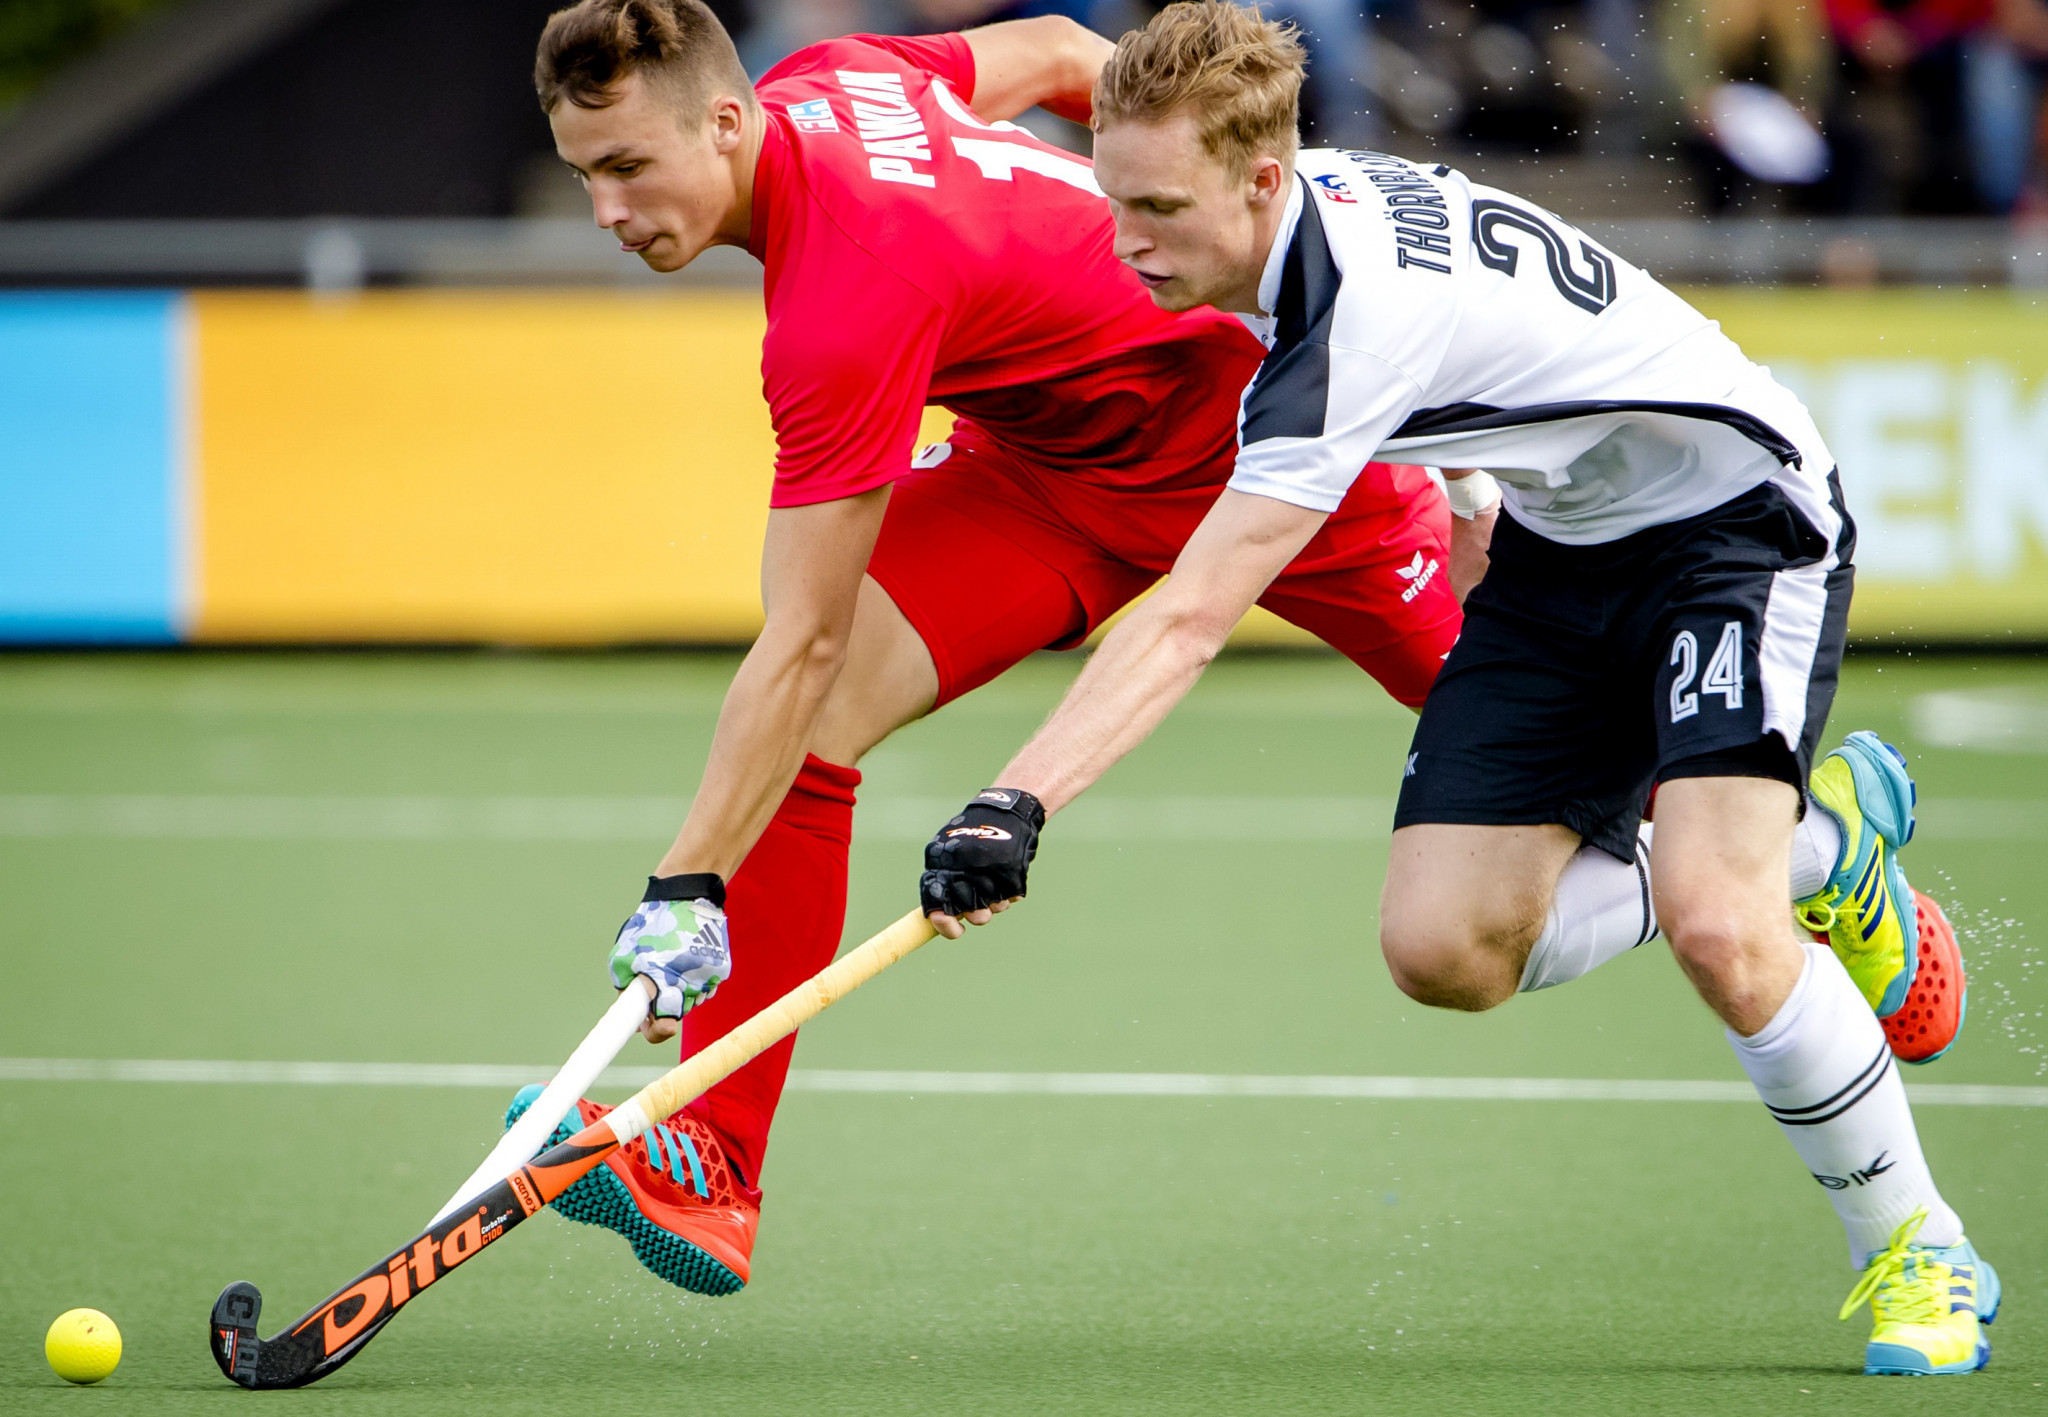 Poland's men are currently sitting atop the table at the Hockey5s tournament in Lausanne ©Getty Images